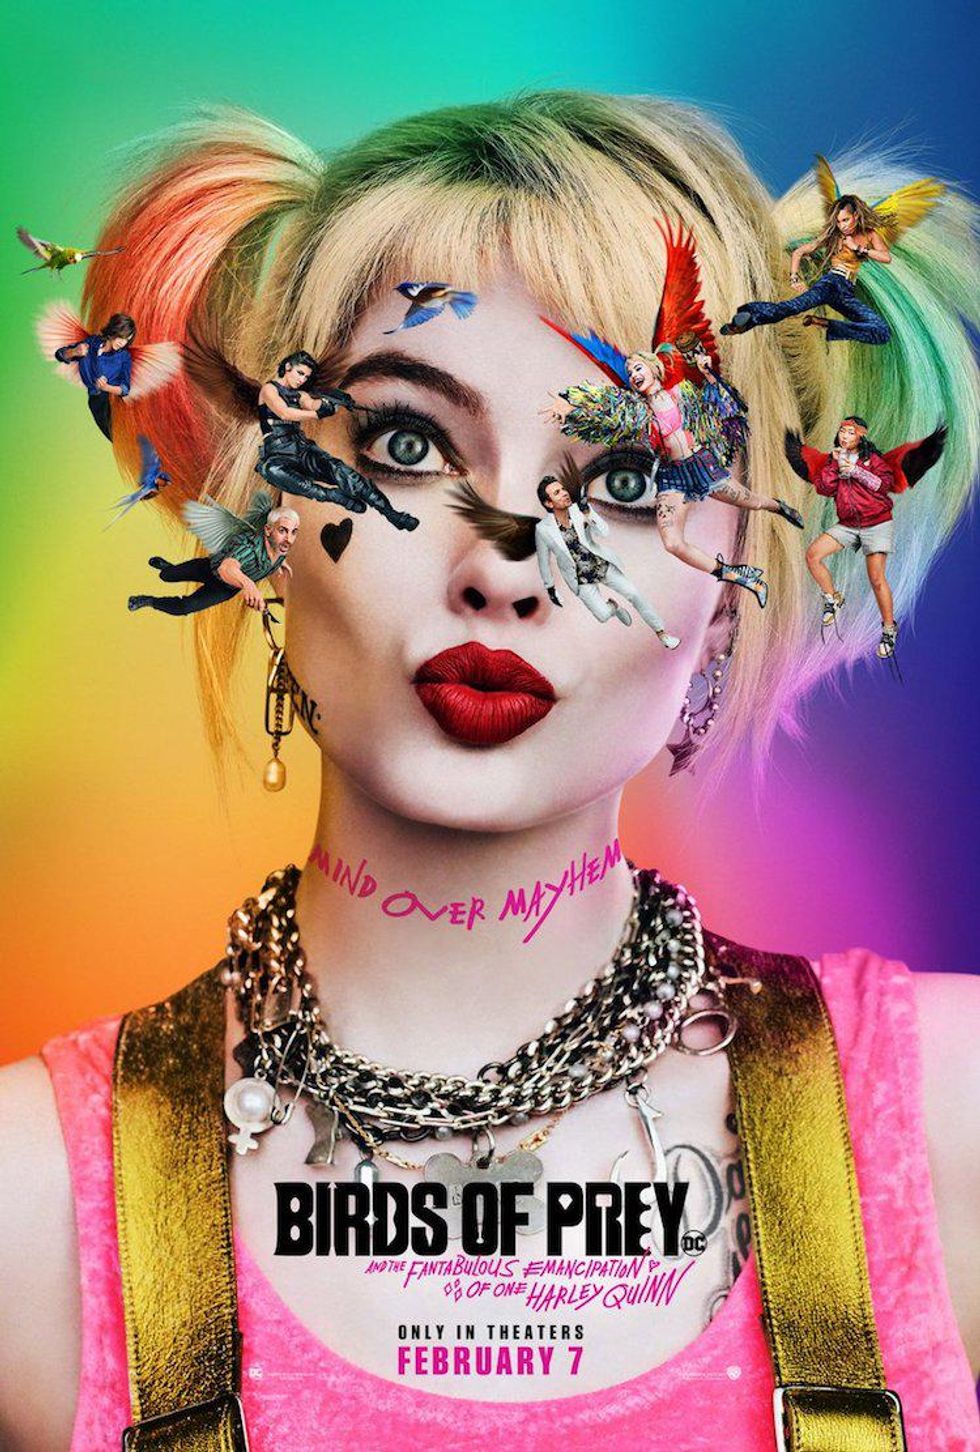 We're Going Cuckoo for Harley Quinn's New 'Birds of Prey' Poster